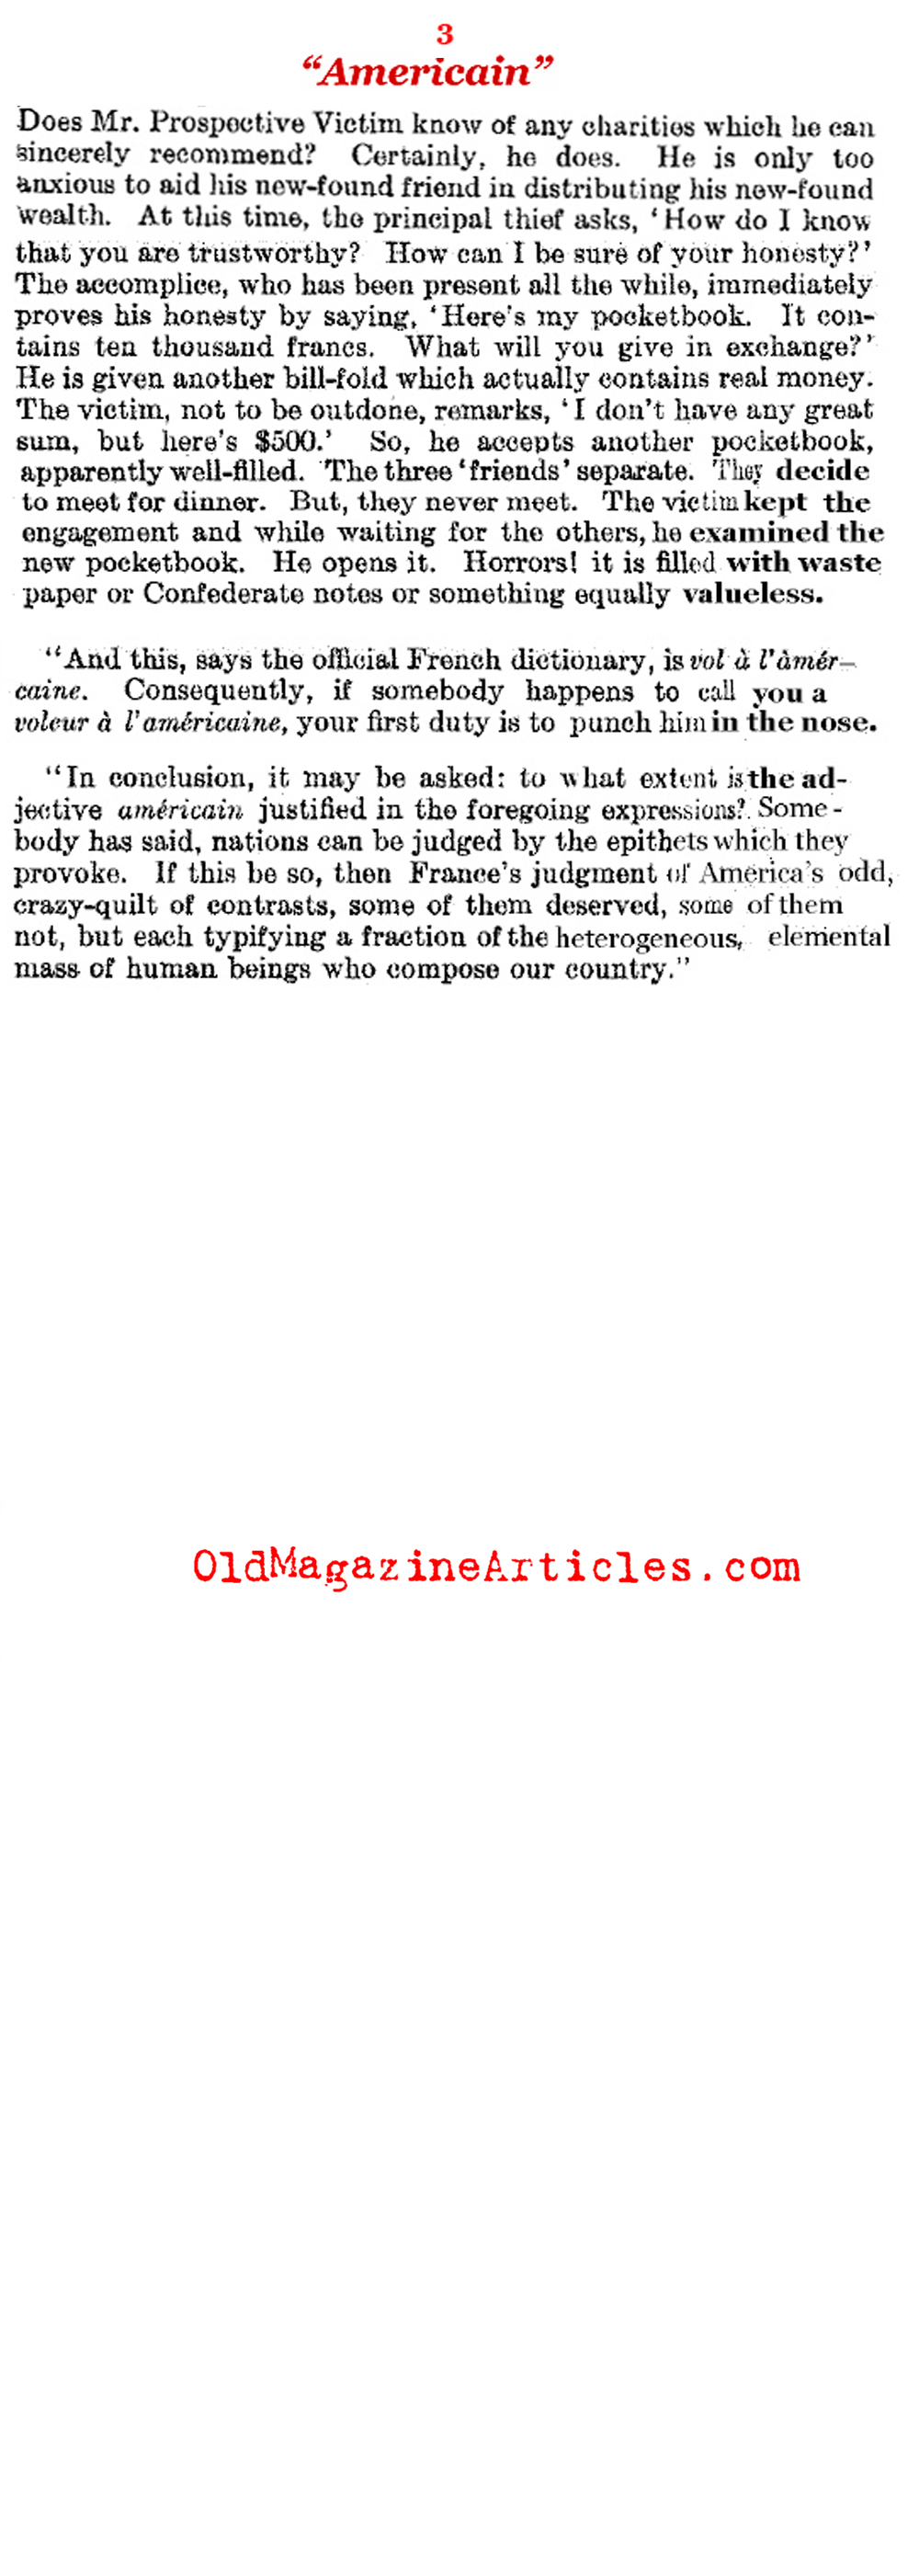 Things 'Americain' in France (Literary Digest, 1927)